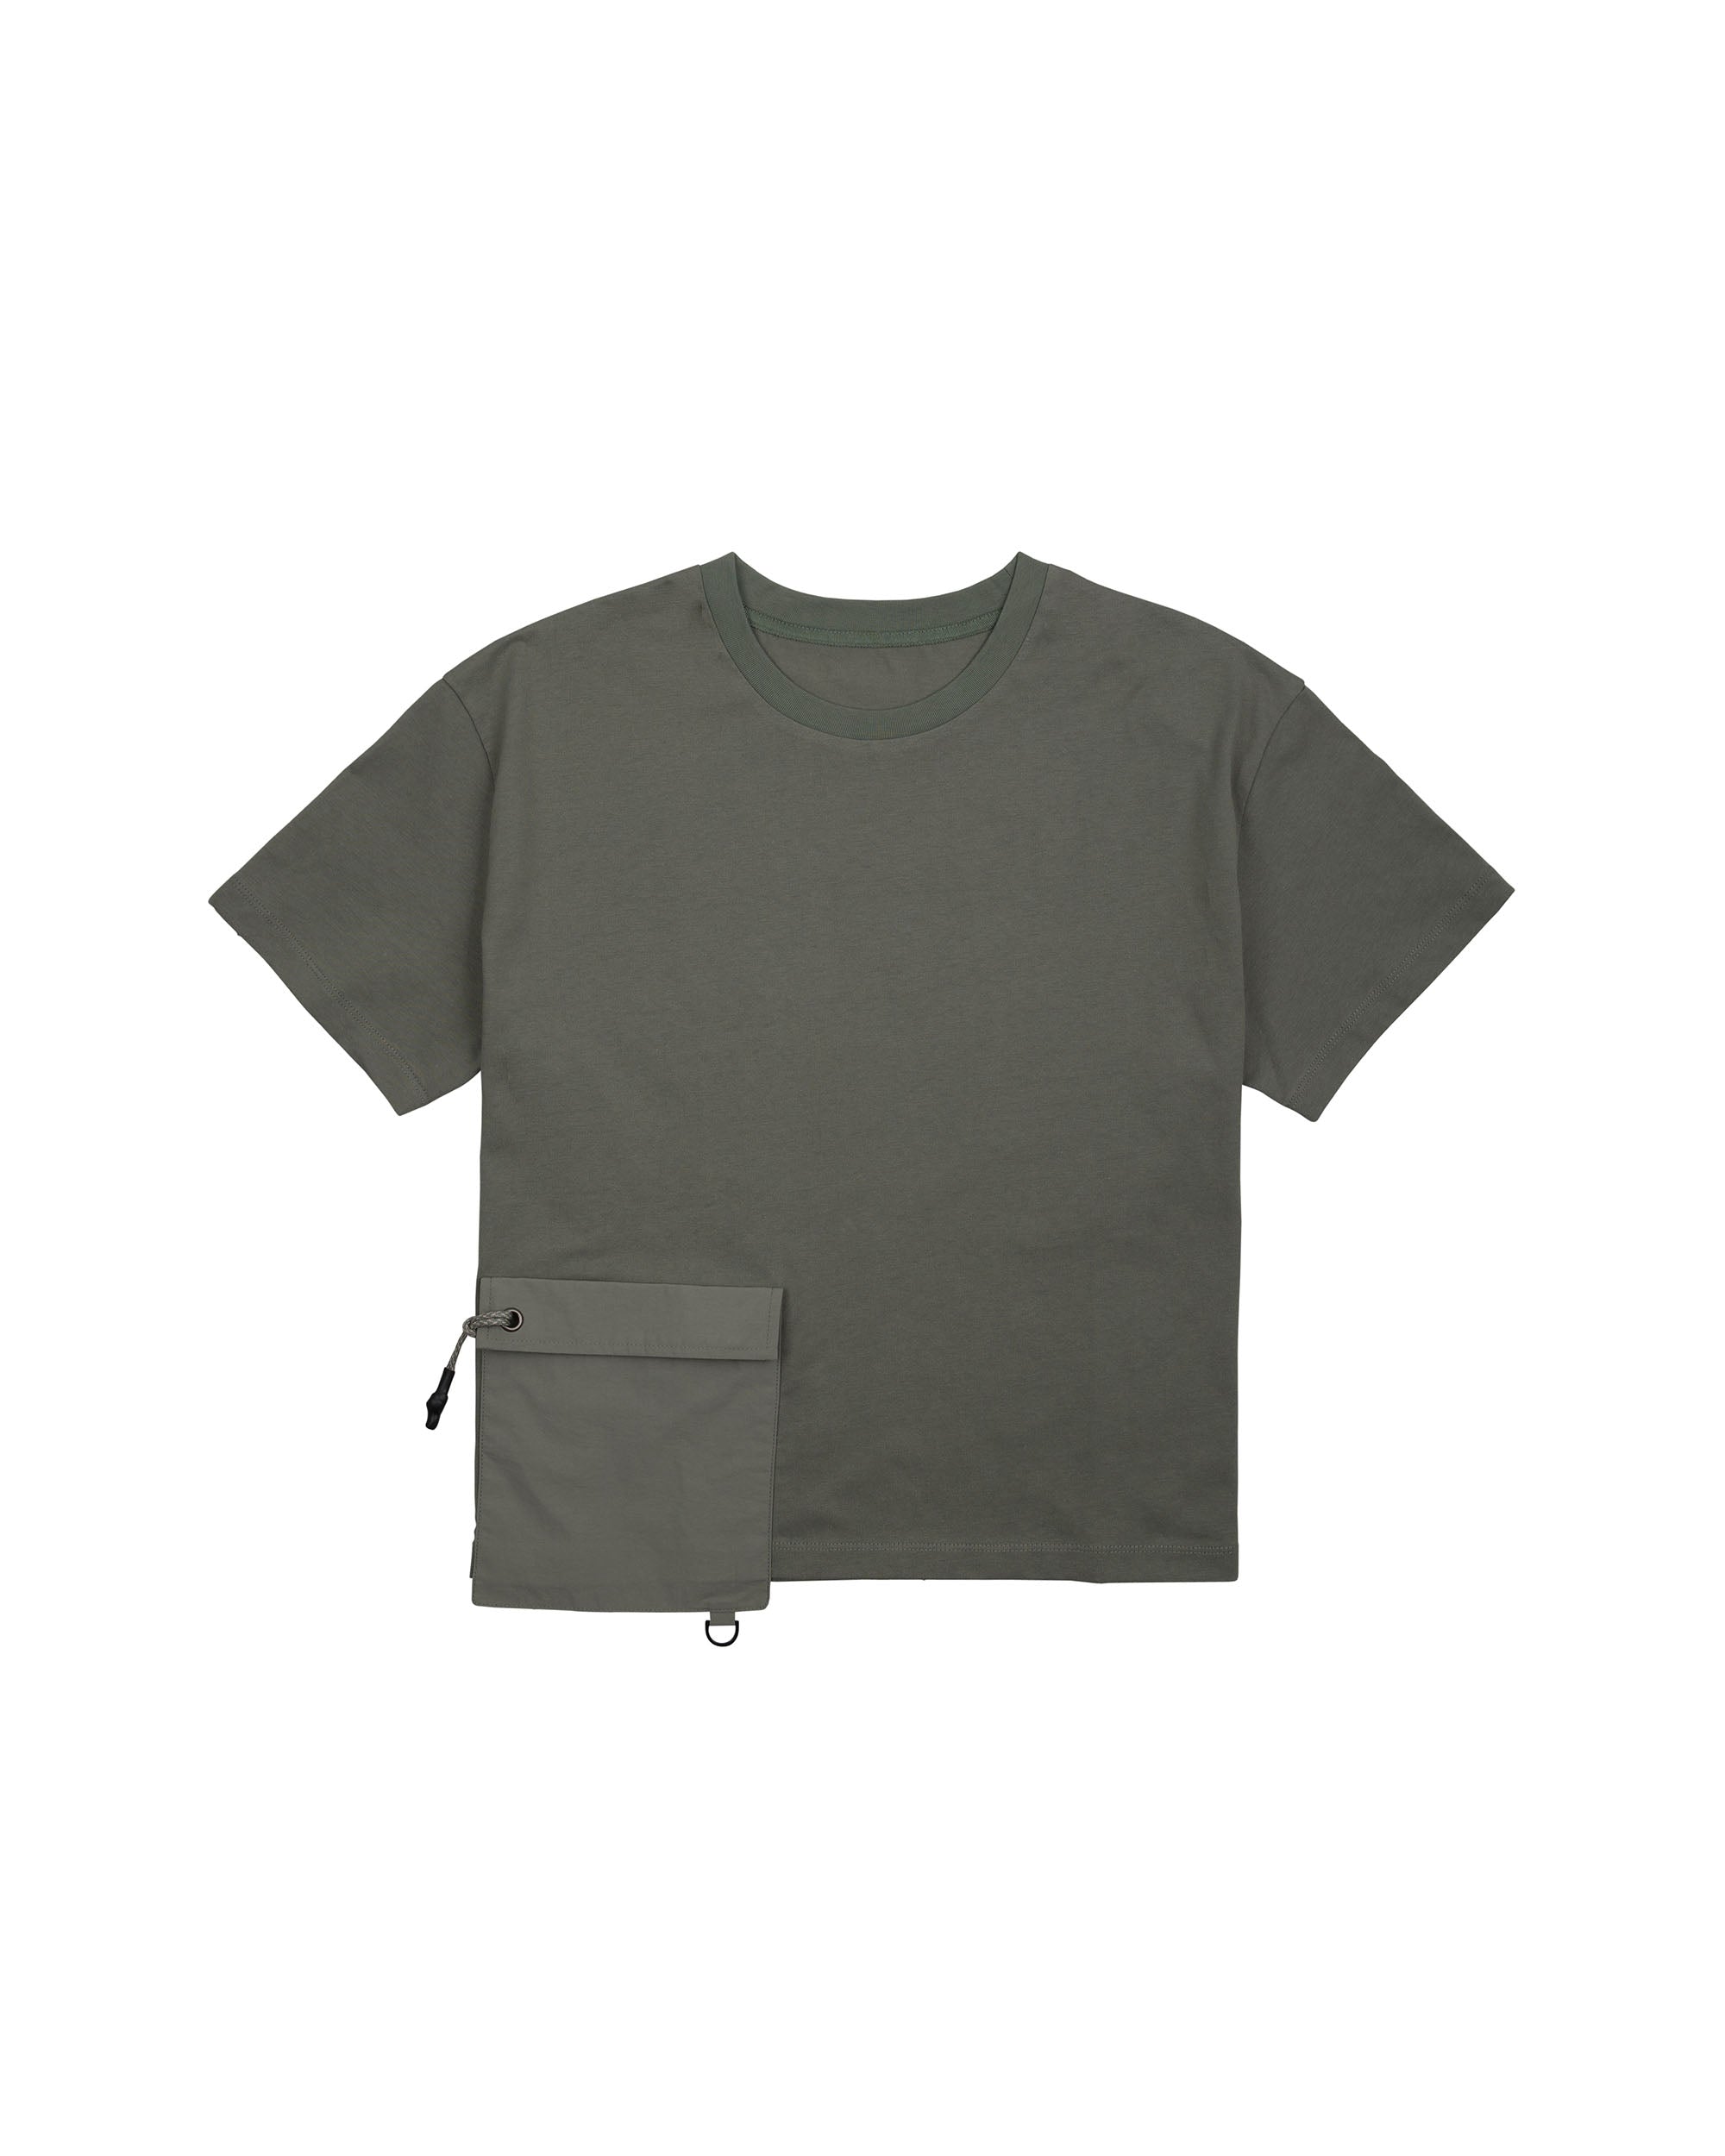 A.T OUTDOOR Pocket Cotton Tee